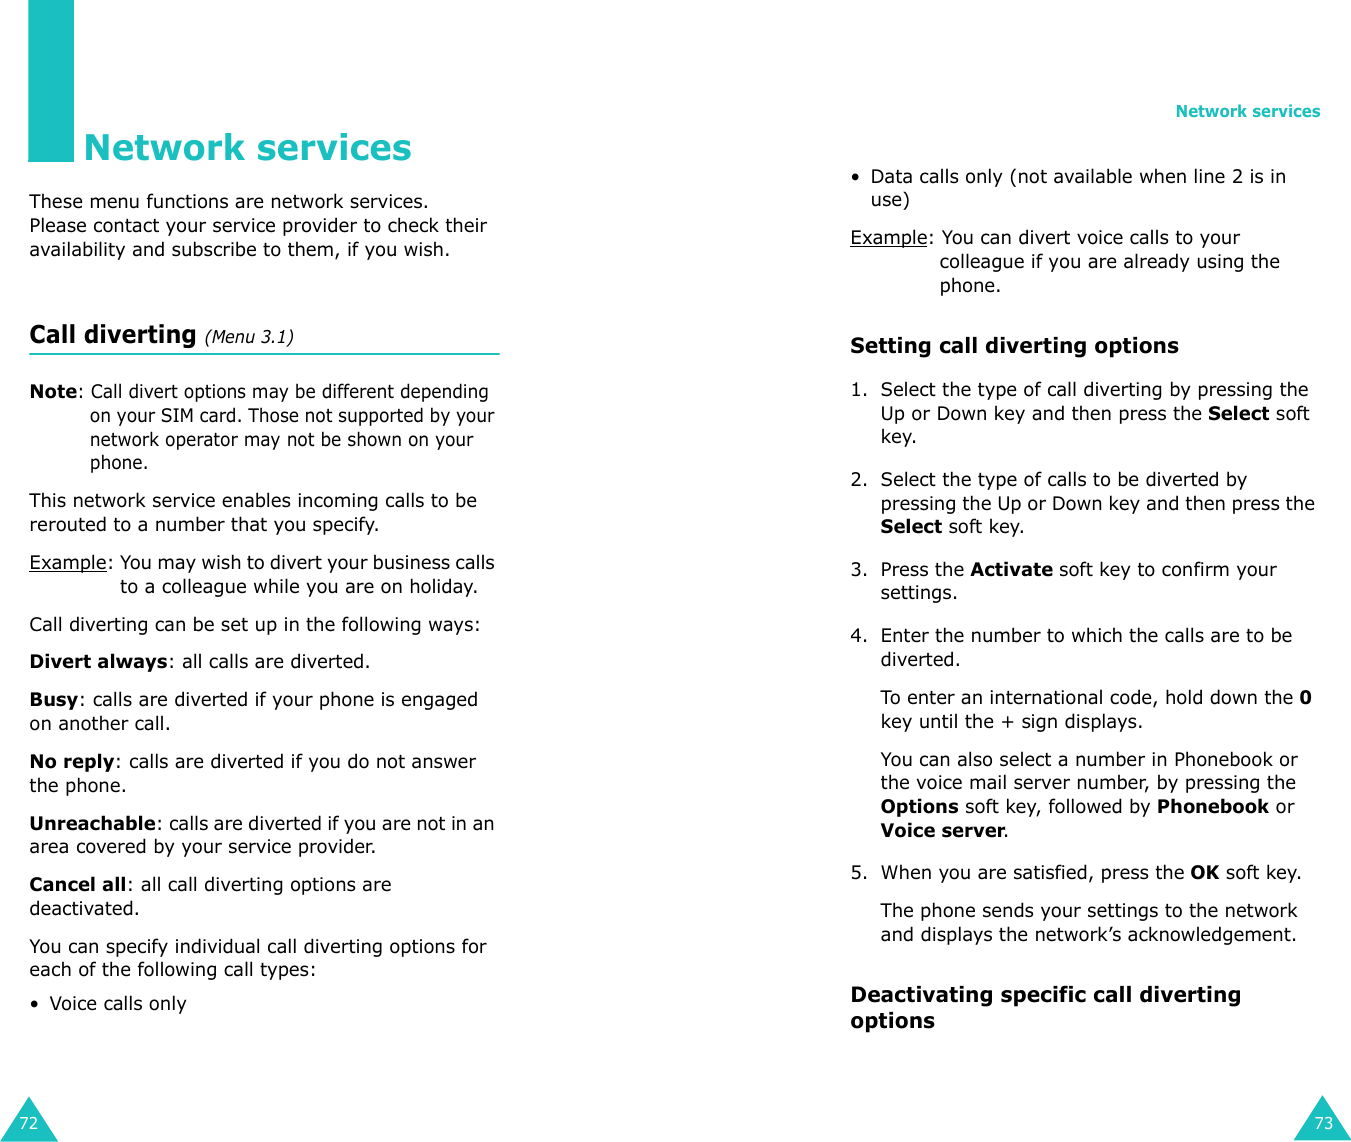 72Network servicesThese menu functions are network services.Please contact your service provider to check their availability and subscribe to them, if you wish.Call diverting (Menu 3.1)Note: Call divert options may be different depending on your SIM card. Those not supported by your network operator may not be shown on your phone.This network service enables incoming calls to be rerouted to a number that you specify.Example: You may wish to divert your business calls to a colleague while you are on holiday.Call diverting can be set up in the following ways:Divert always: all calls are diverted.Busy: calls are diverted if your phone is engaged on another call.No reply: calls are diverted if you do not answer the phone.Unreachable: calls are diverted if you are not in an area covered by your service provider.Cancel all: all call diverting options are deactivated.You can specify individual call diverting options for each of the following call types:• Voice calls onlyNetwork services73• Data calls only (not available when line 2 is in use)Example: You can divert voice calls to your colleague if you are already using the phone.Setting call diverting options1. Select the type of call diverting by pressing the Up or Down key and then press the Select soft key.2. Select the type of calls to be diverted by pressing the Up or Down key and then press the Select soft key.3. Press the Activate soft key to confirm your settings.4. Enter the number to which the calls are to be diverted.To enter an international code, hold down the 0 key until the + sign displays. You can also select a number in Phonebook or the voice mail server number, by pressing the Options soft key, followed by Phonebook or Voice server.5. When you are satisfied, press the OK soft key. The phone sends your settings to the network and displays the network’s acknowledgement.Deactivating specific call diverting options